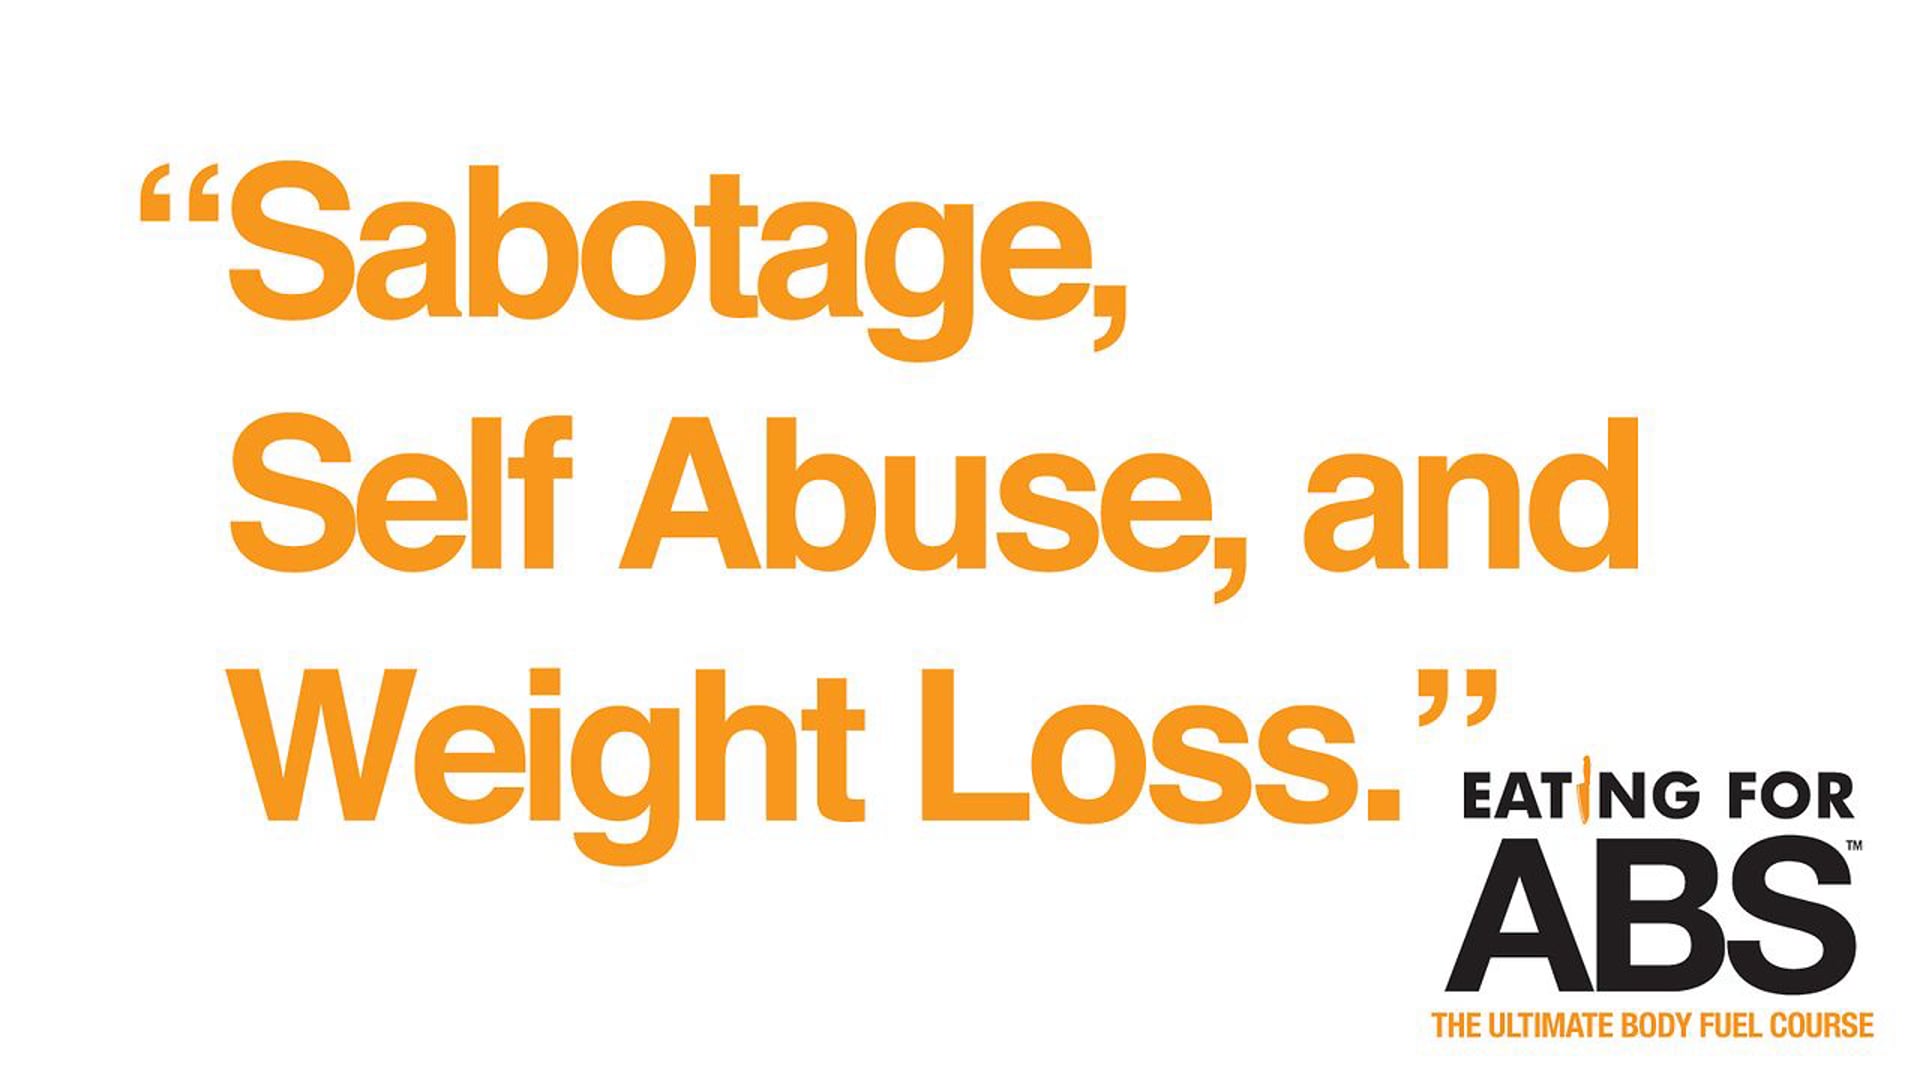 Sabotage, Self Abuse and Weight Loss